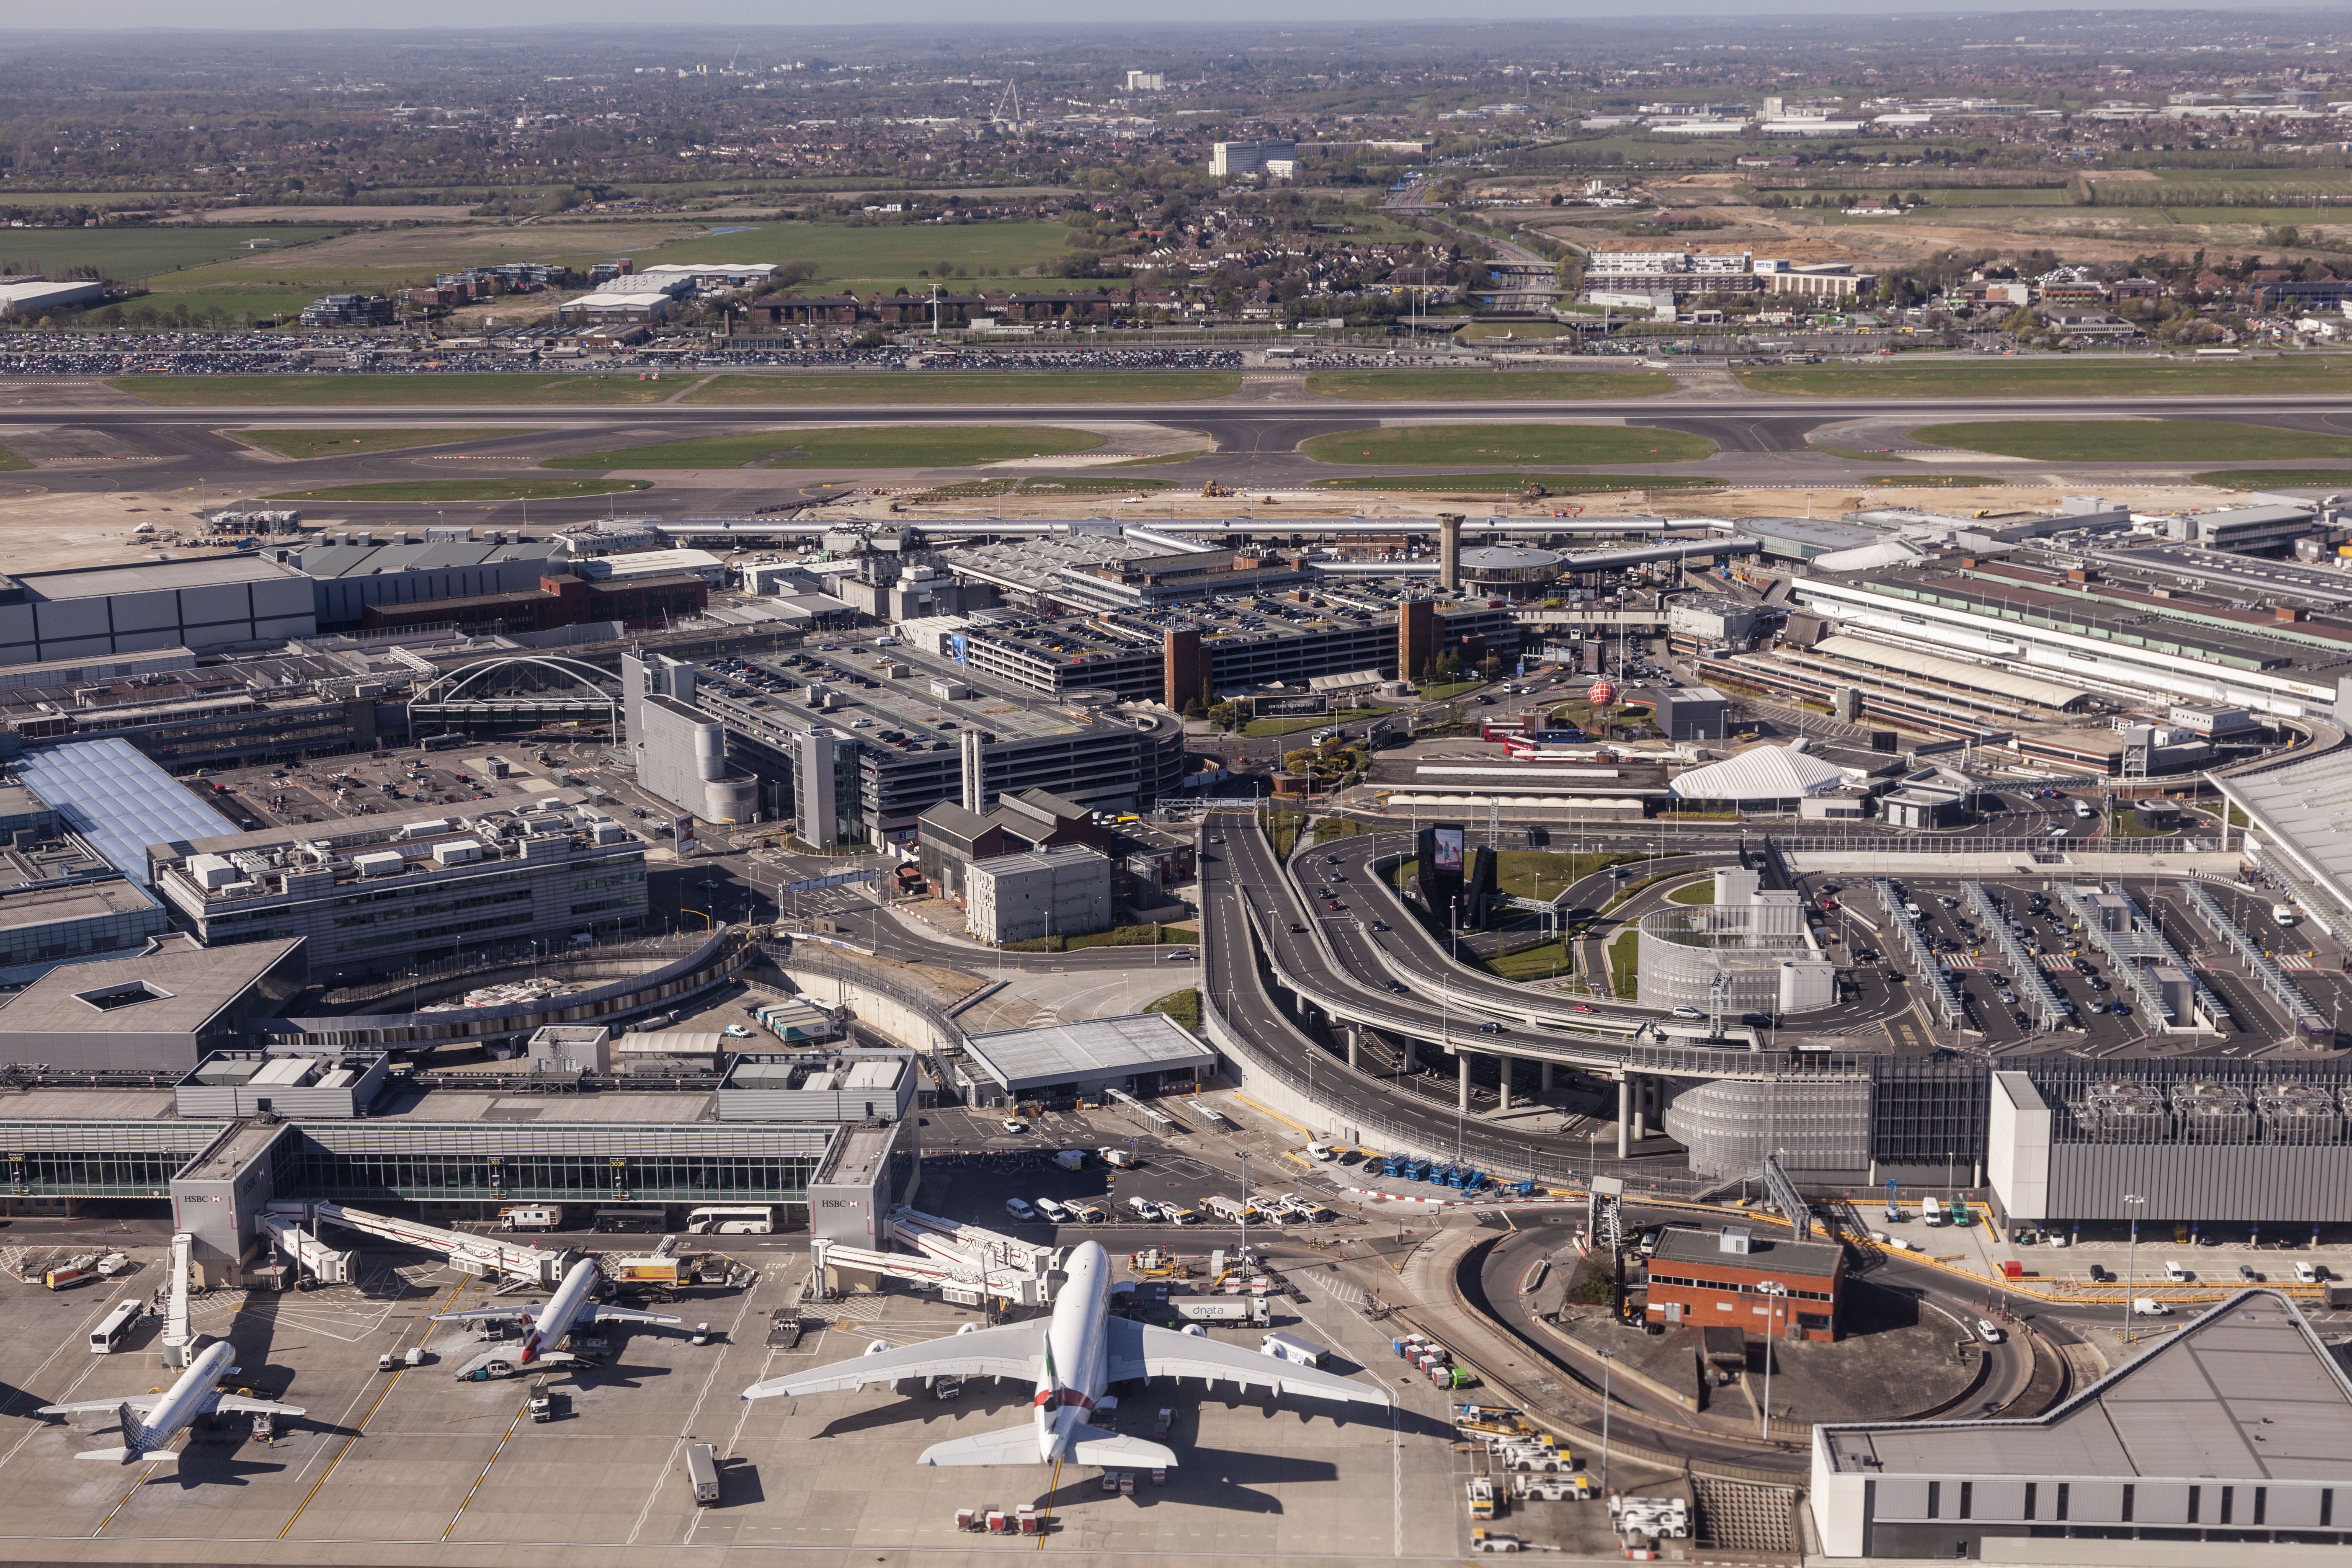 An Aerial View of London Heathrow Airport's Terminals 1, 2, and 3.